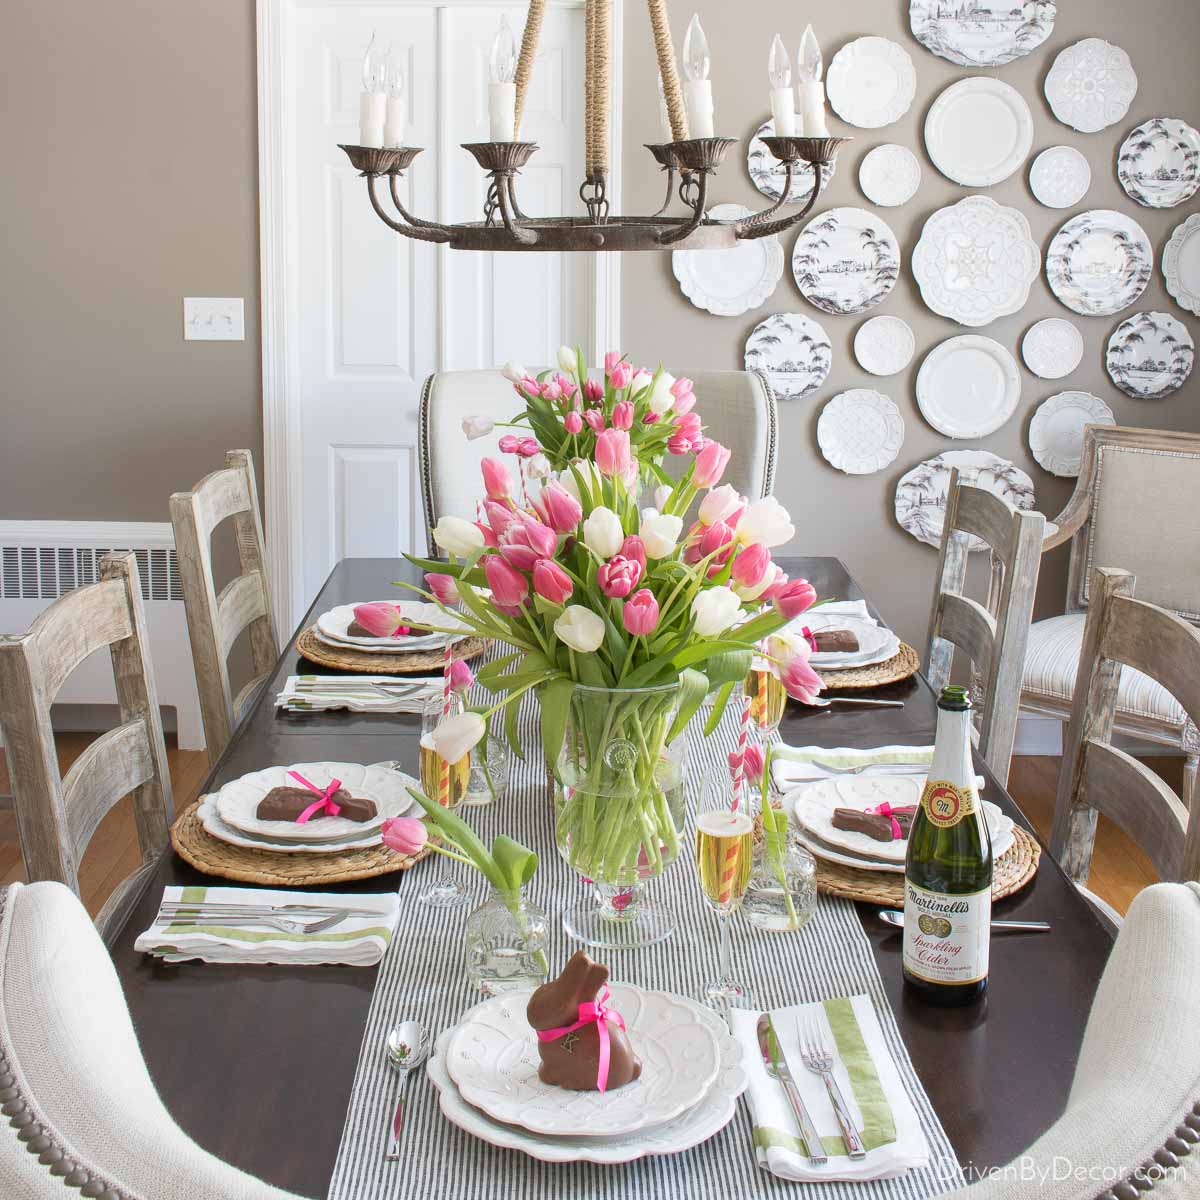 Simple Easter Table Decor Ideas! - Driven by Decor